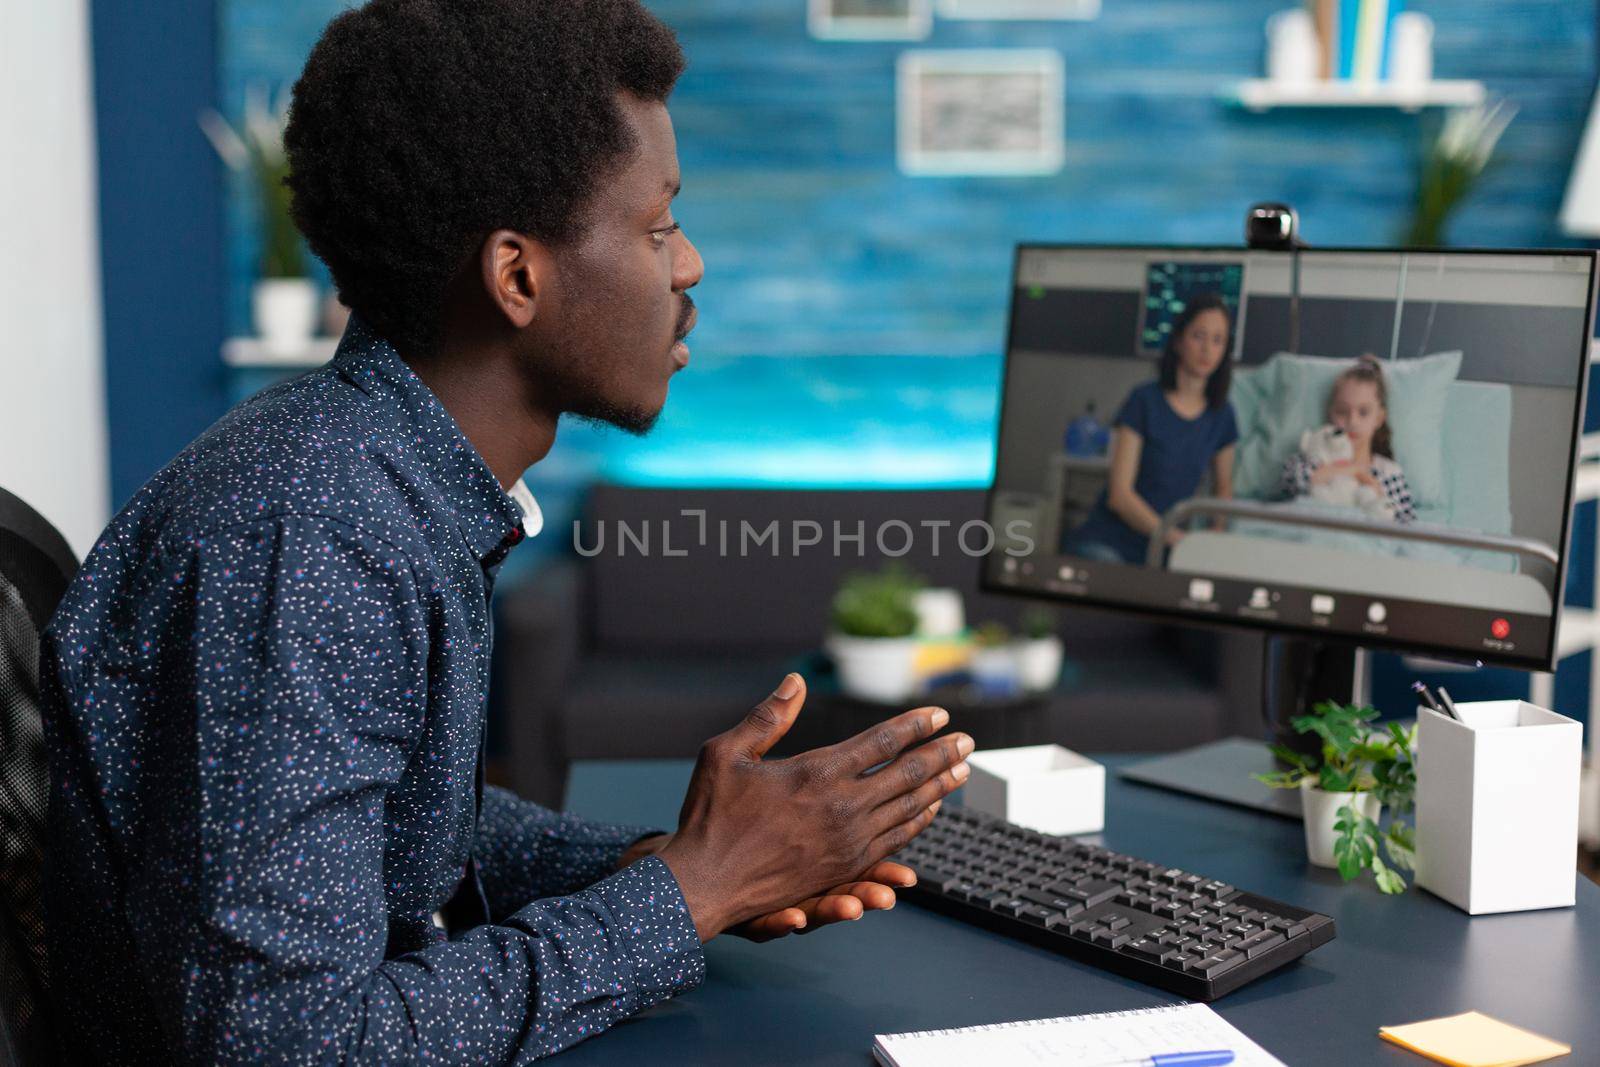 Black man talking with his family in hospital ward, using intenet online teleconference video call to connect with loved ones. Webcam app used for healthcare treatment consultation